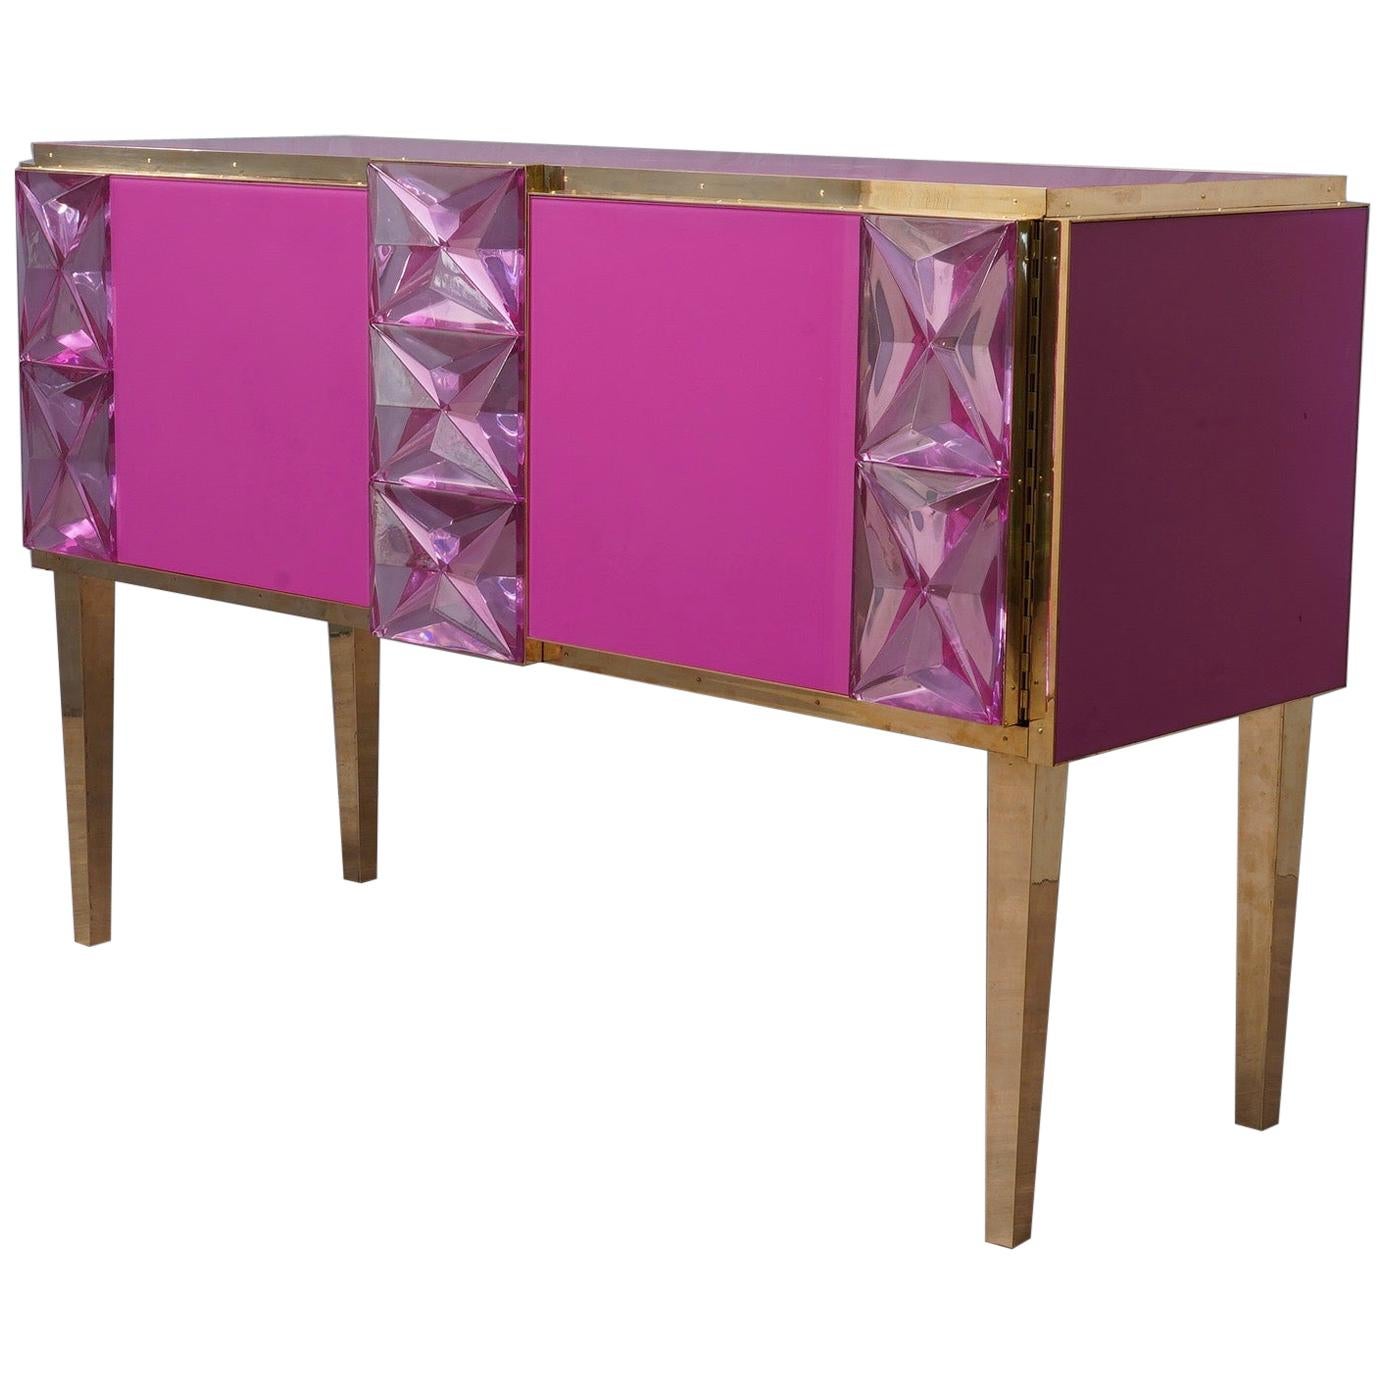 Murano Midcentury Pastel Pink Colored Glass Sideboards, 2020